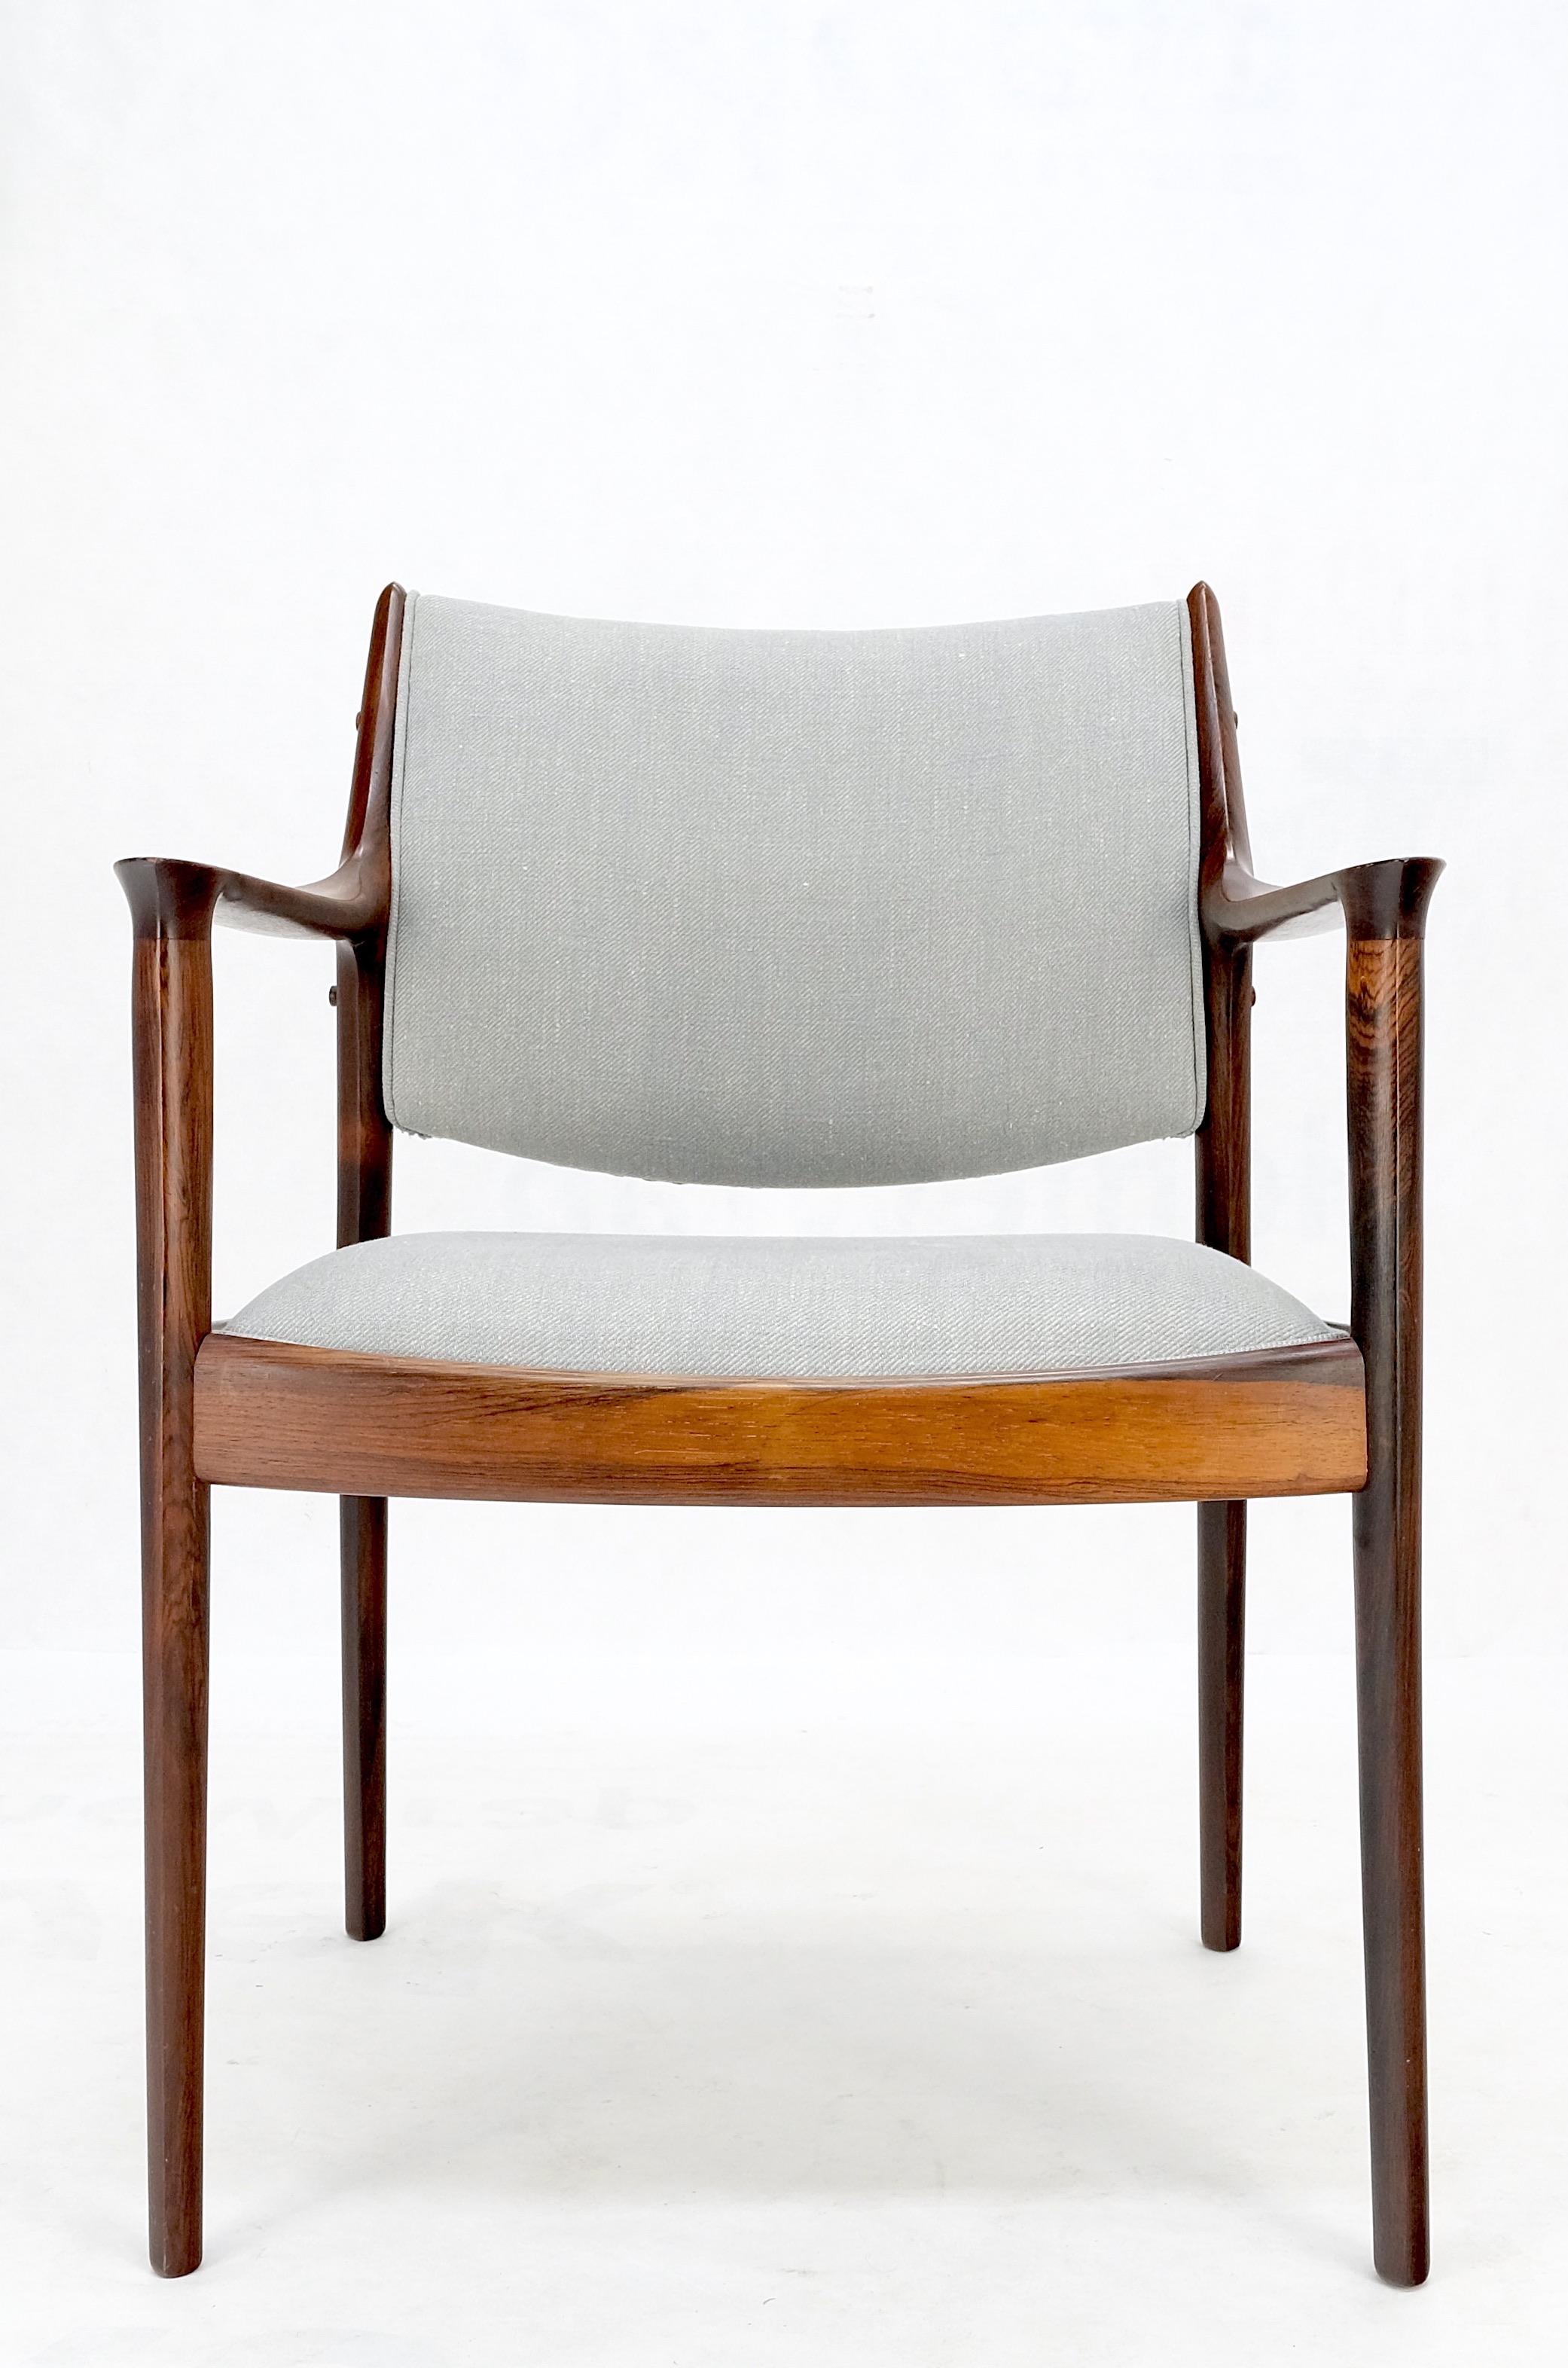 Solid Rosewood New Upholstery Danish Mid-Century Modern Side Office Desk Chair 4